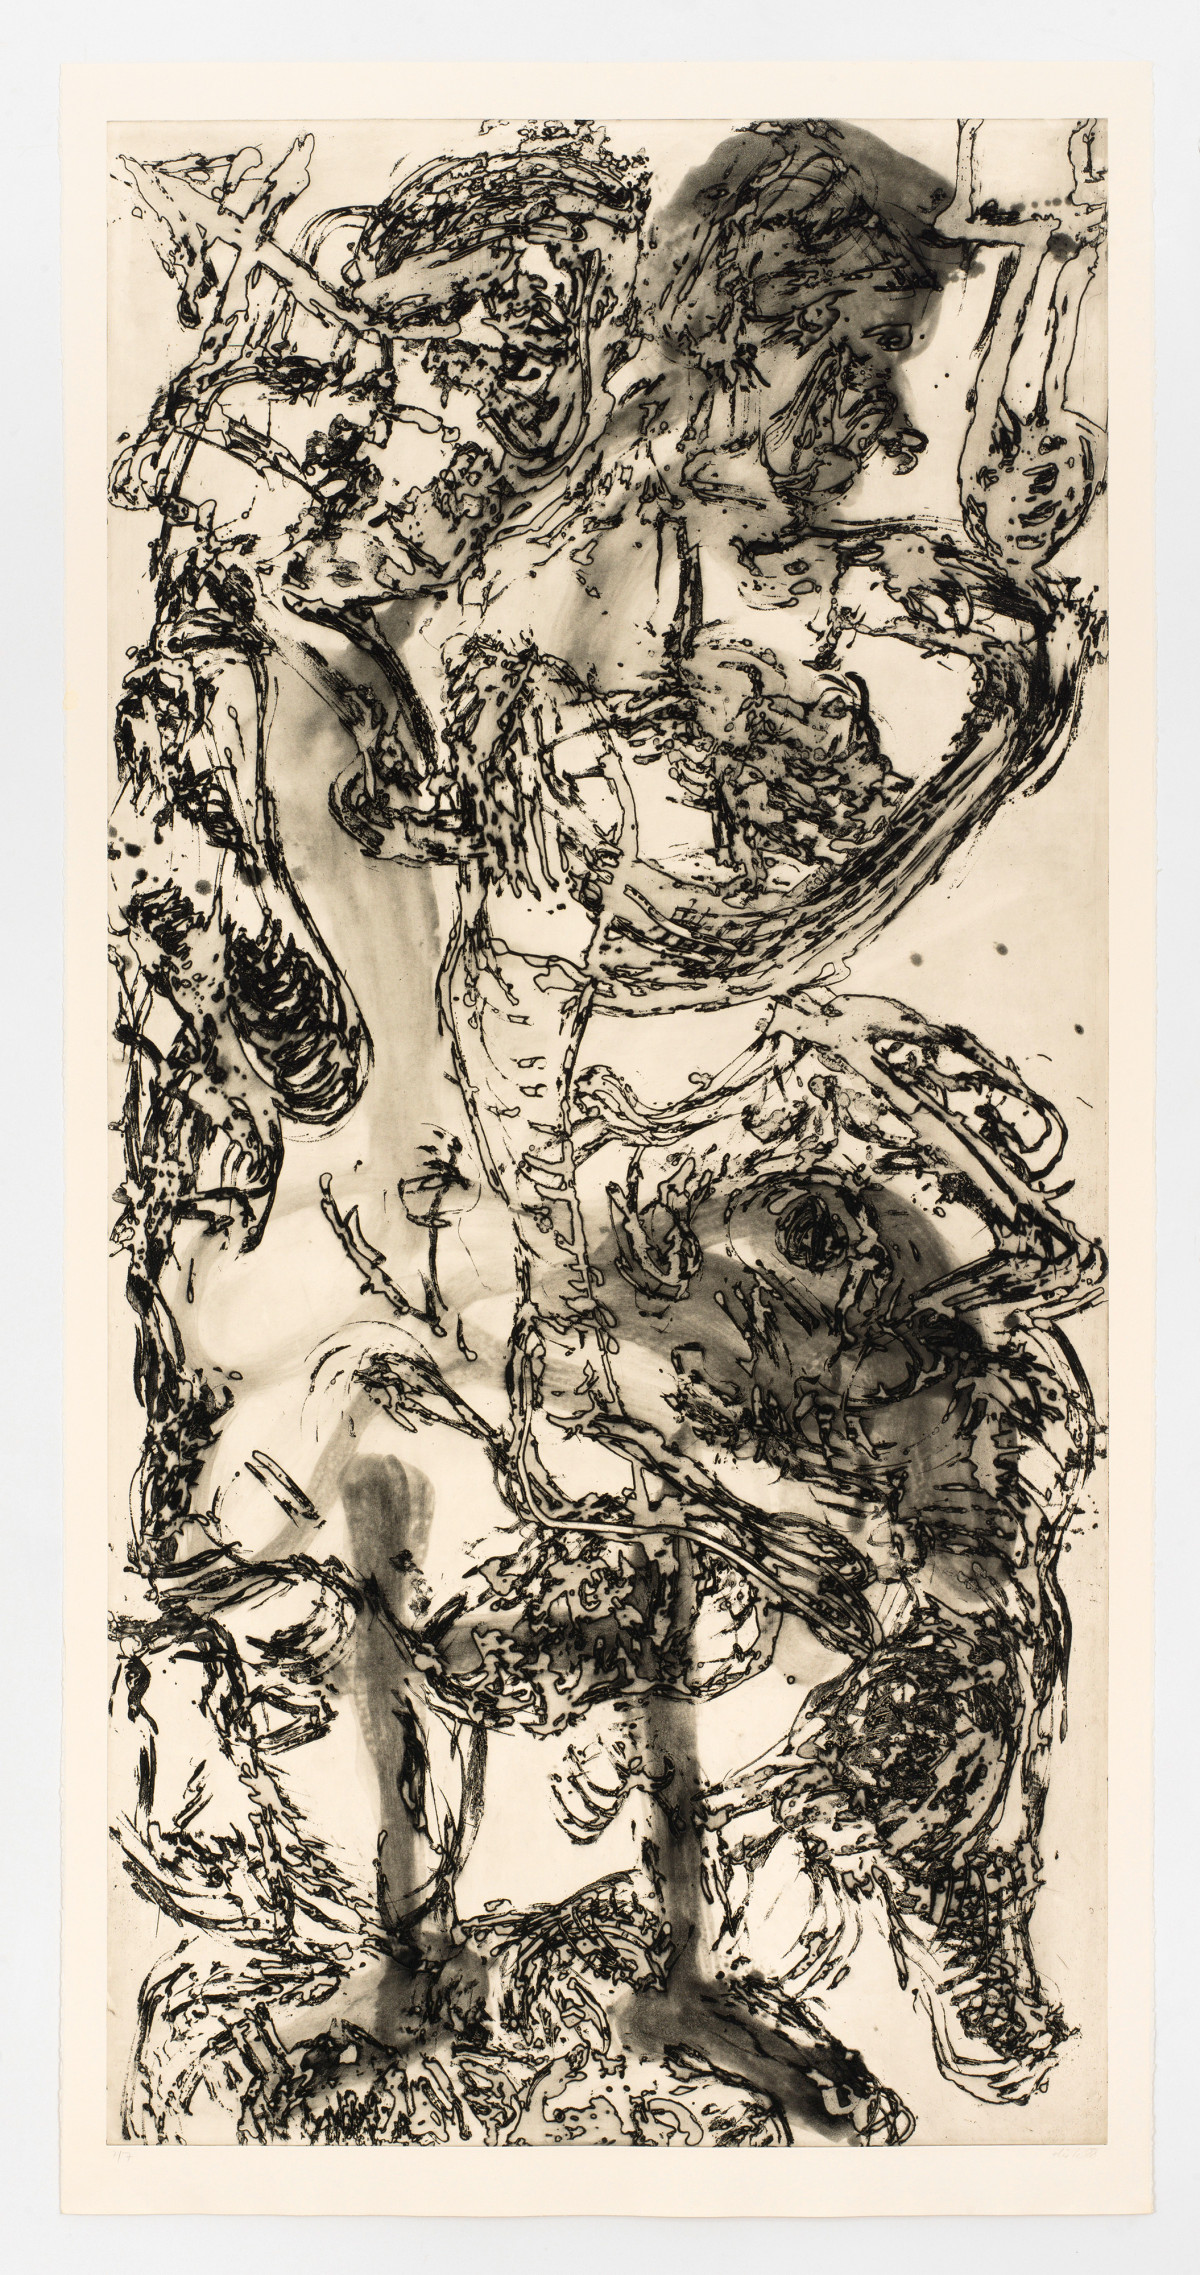 Martin Disler, untitled,1988, etching and aquatinta on Arches, 211x107,5 cm, 83 x 42¼ in